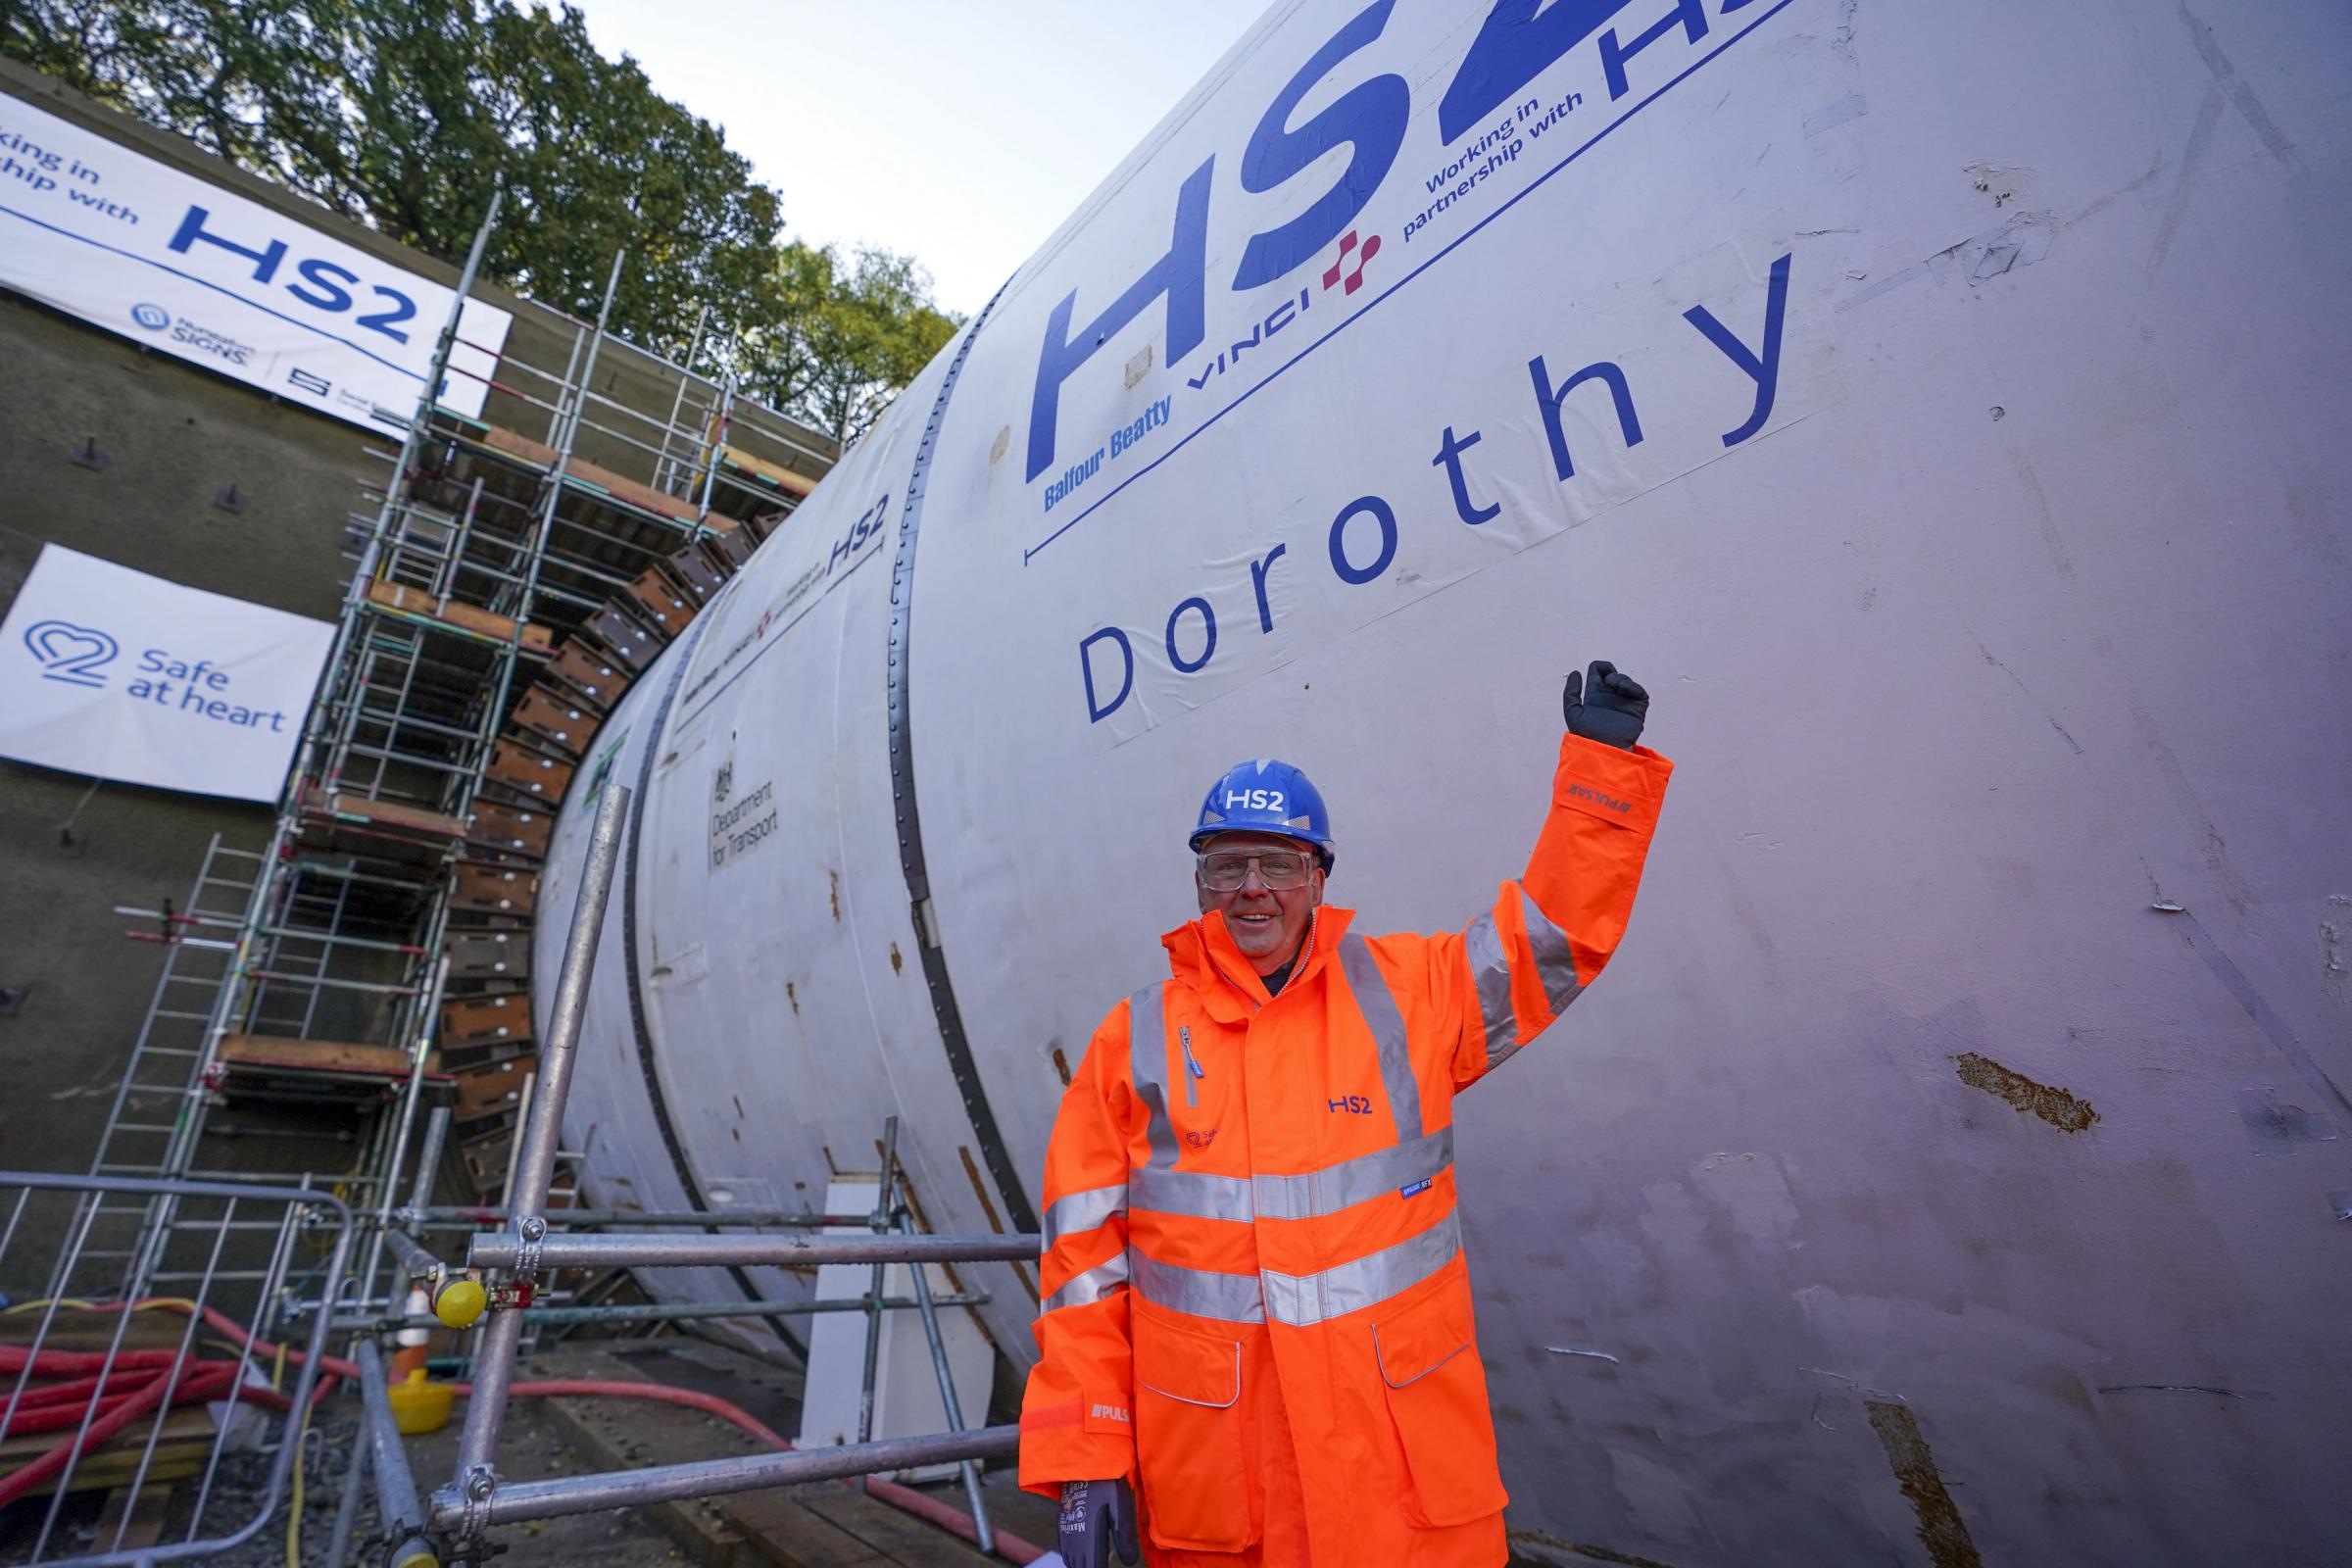 Pete Waterman at the unveiling of HS2s 2,000 tonne tunnel boring machine that will create a one-mile twin bore tunnel under Long Itchington Wood, Warwickshire. The machine has been named Dorothy, after Dorothy Hodgkin the first British woman to win the